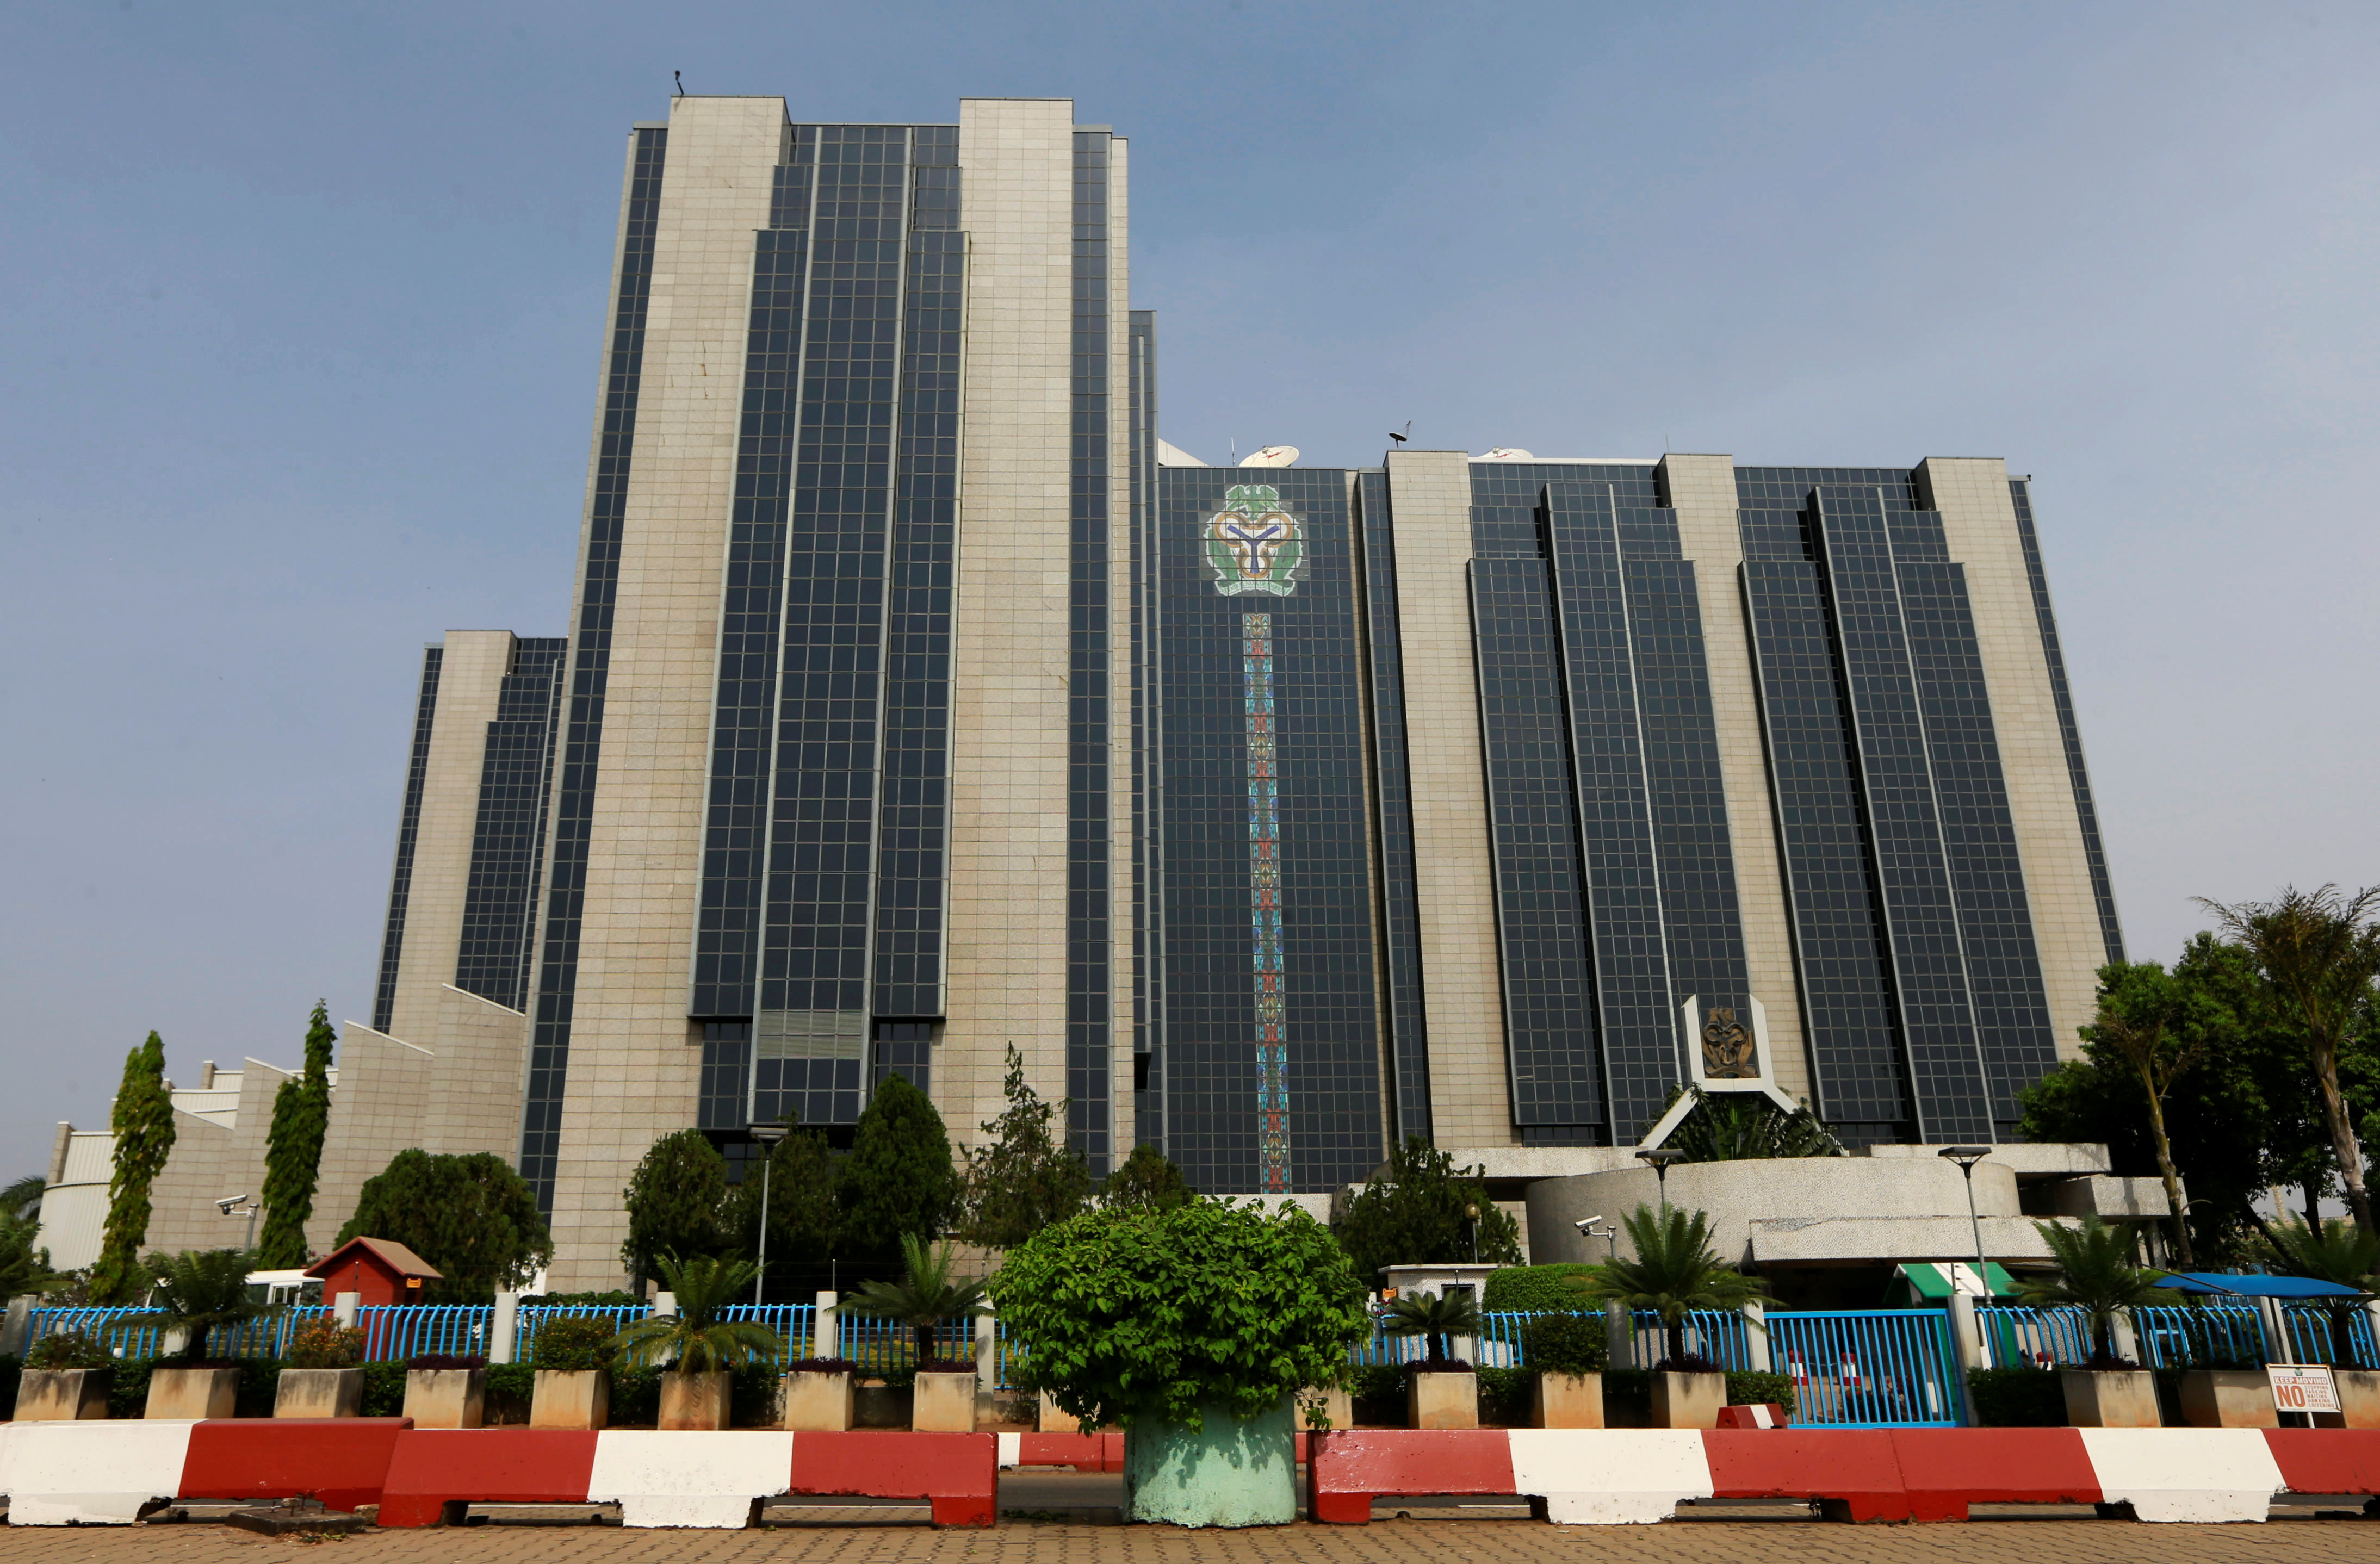 A view shows Nigeria's Central Bank headquarters in Abuja, Nigeria November 22, 2020. Picture taken November 22, 2020. REUTERS/Afolabi Sotunde